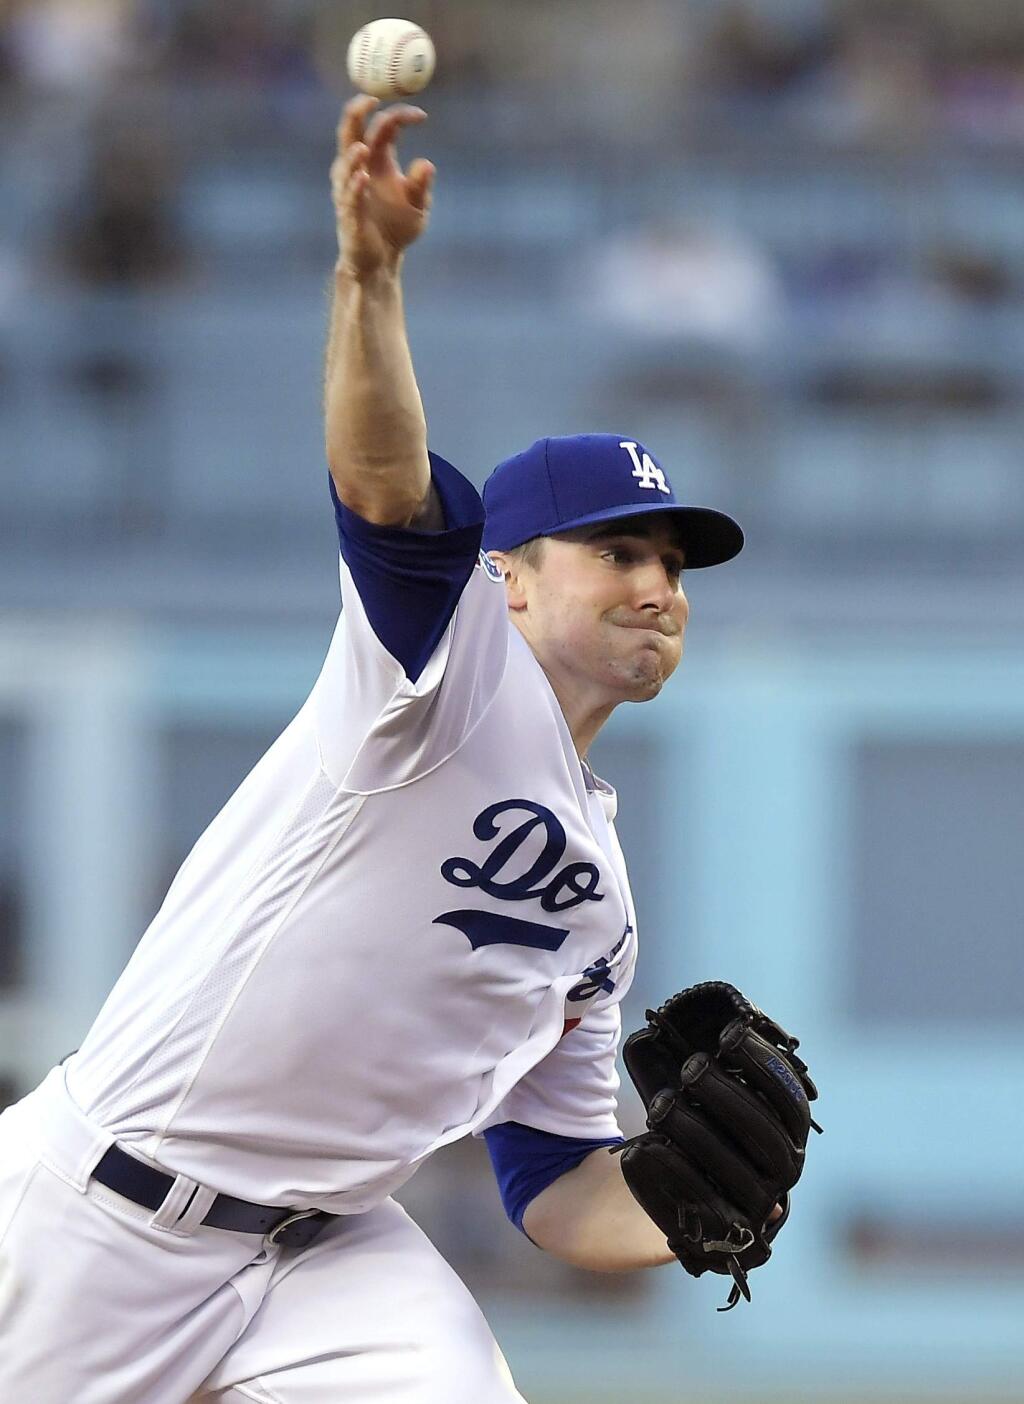 Los Angeles Dodgers pitcher Ross Stripling throws during the first inning of the team's baseball game against the San Francisco Giants on Friday, June 15, 2018, in Los Angeles. (AP Photo/Mark J. Terrill)